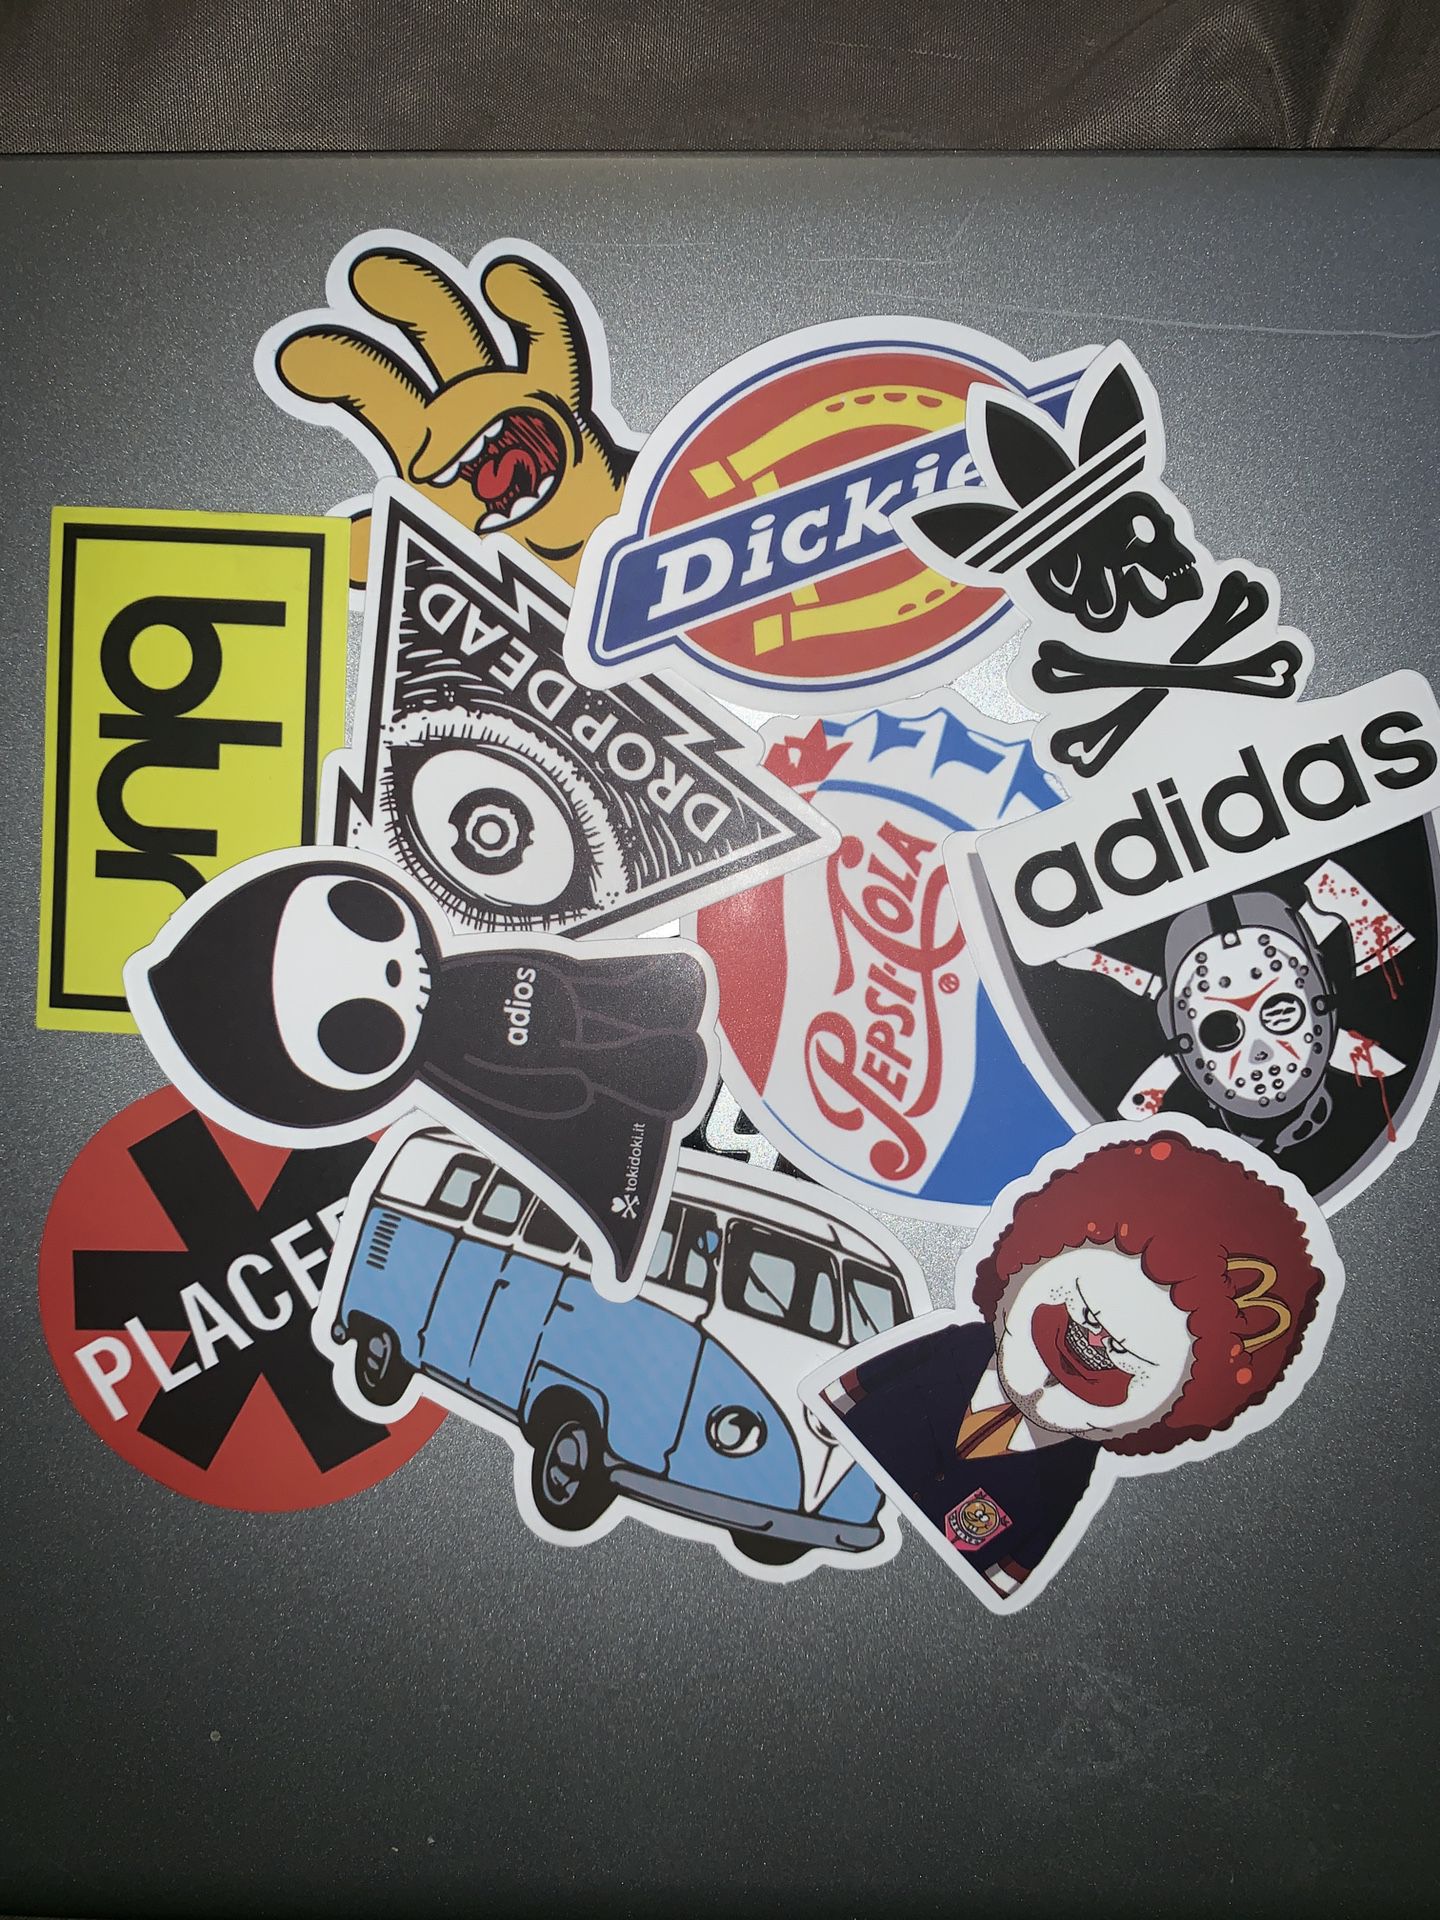 Stickers - 12 pack - $10